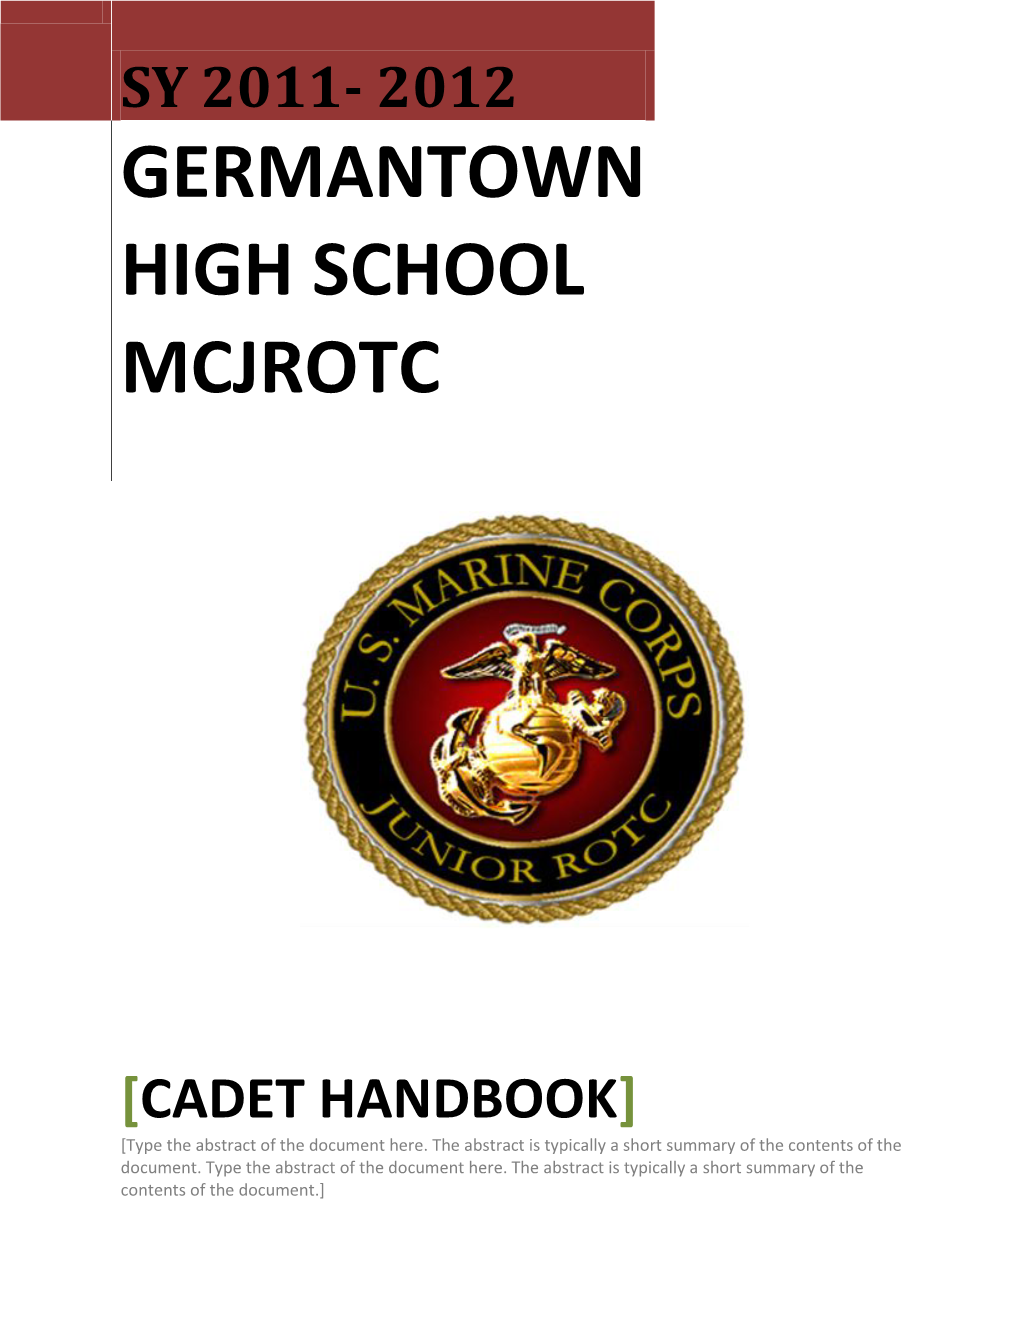 CADET HANDBOOK] [Type the Abstract of the Document Here